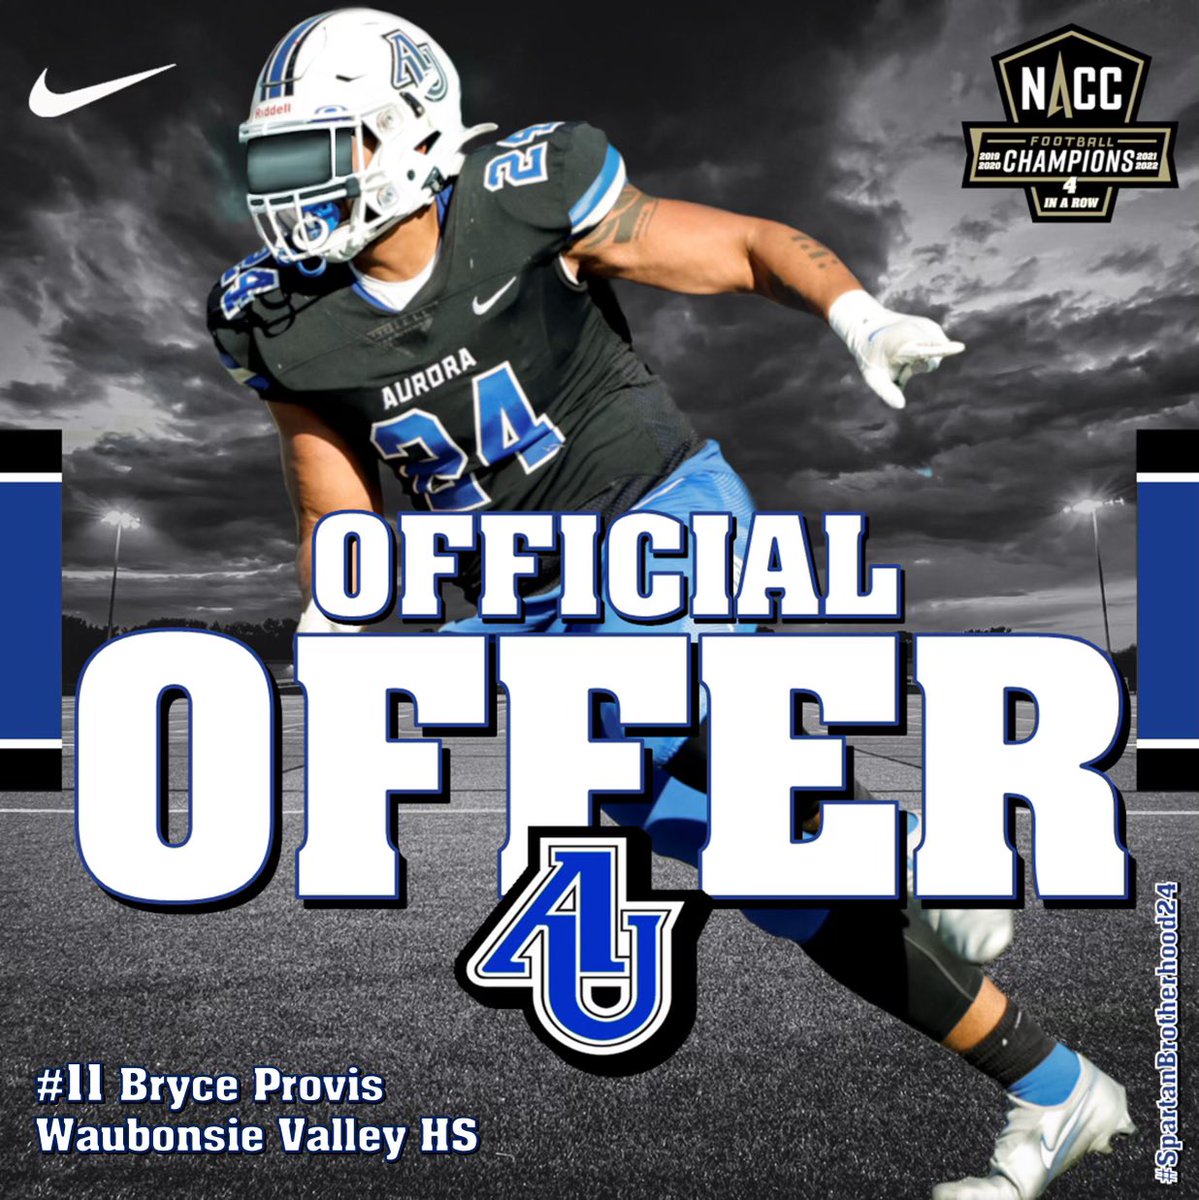 Excited to receive an offer to play football for @AU_SpartanFB Thank you @DonBeebeNFL!! @FOOTBALLWVHS @athleticswvhs